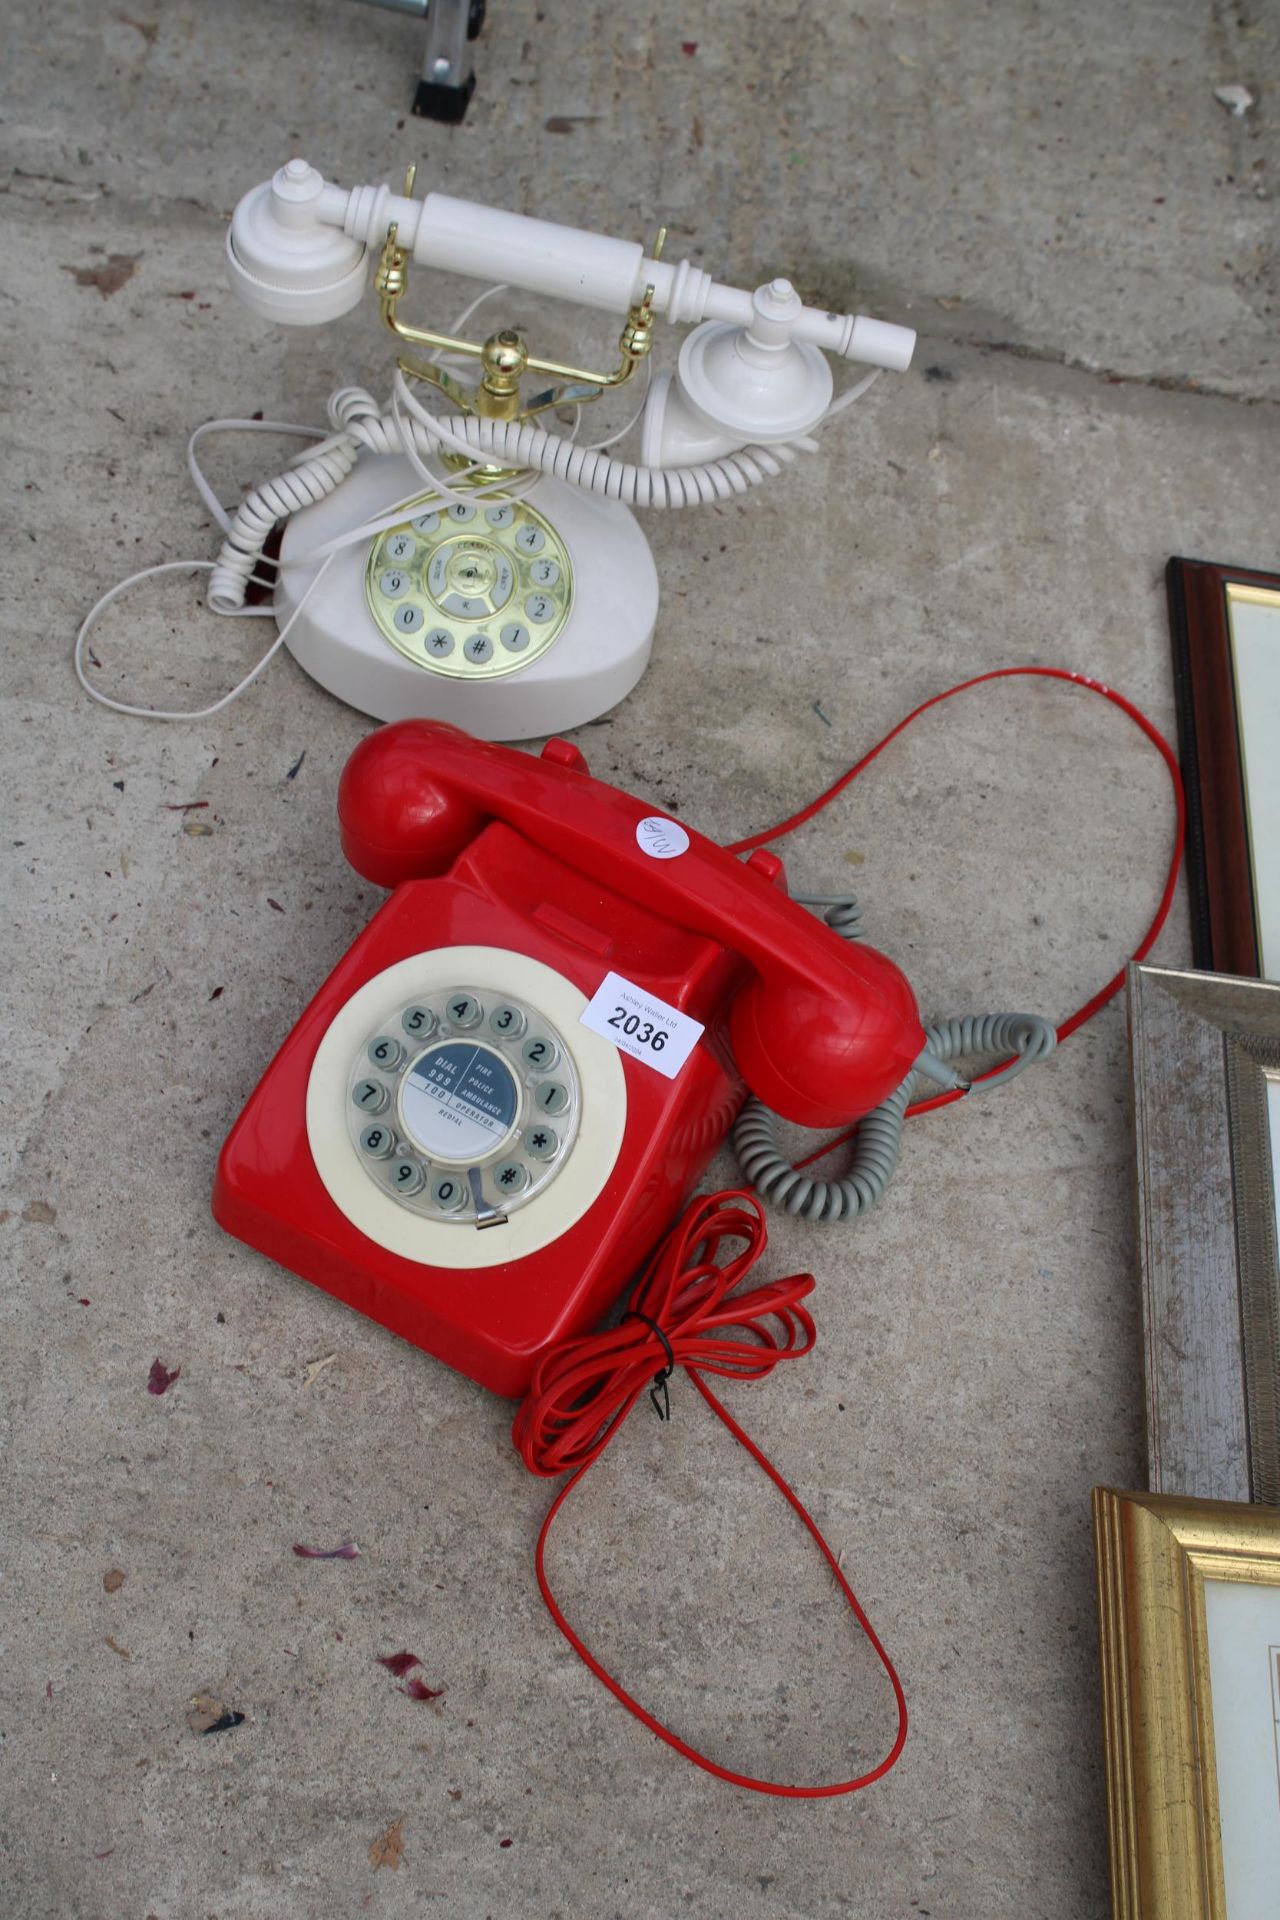 TWO VINTAGE STYLE TELEPHONES